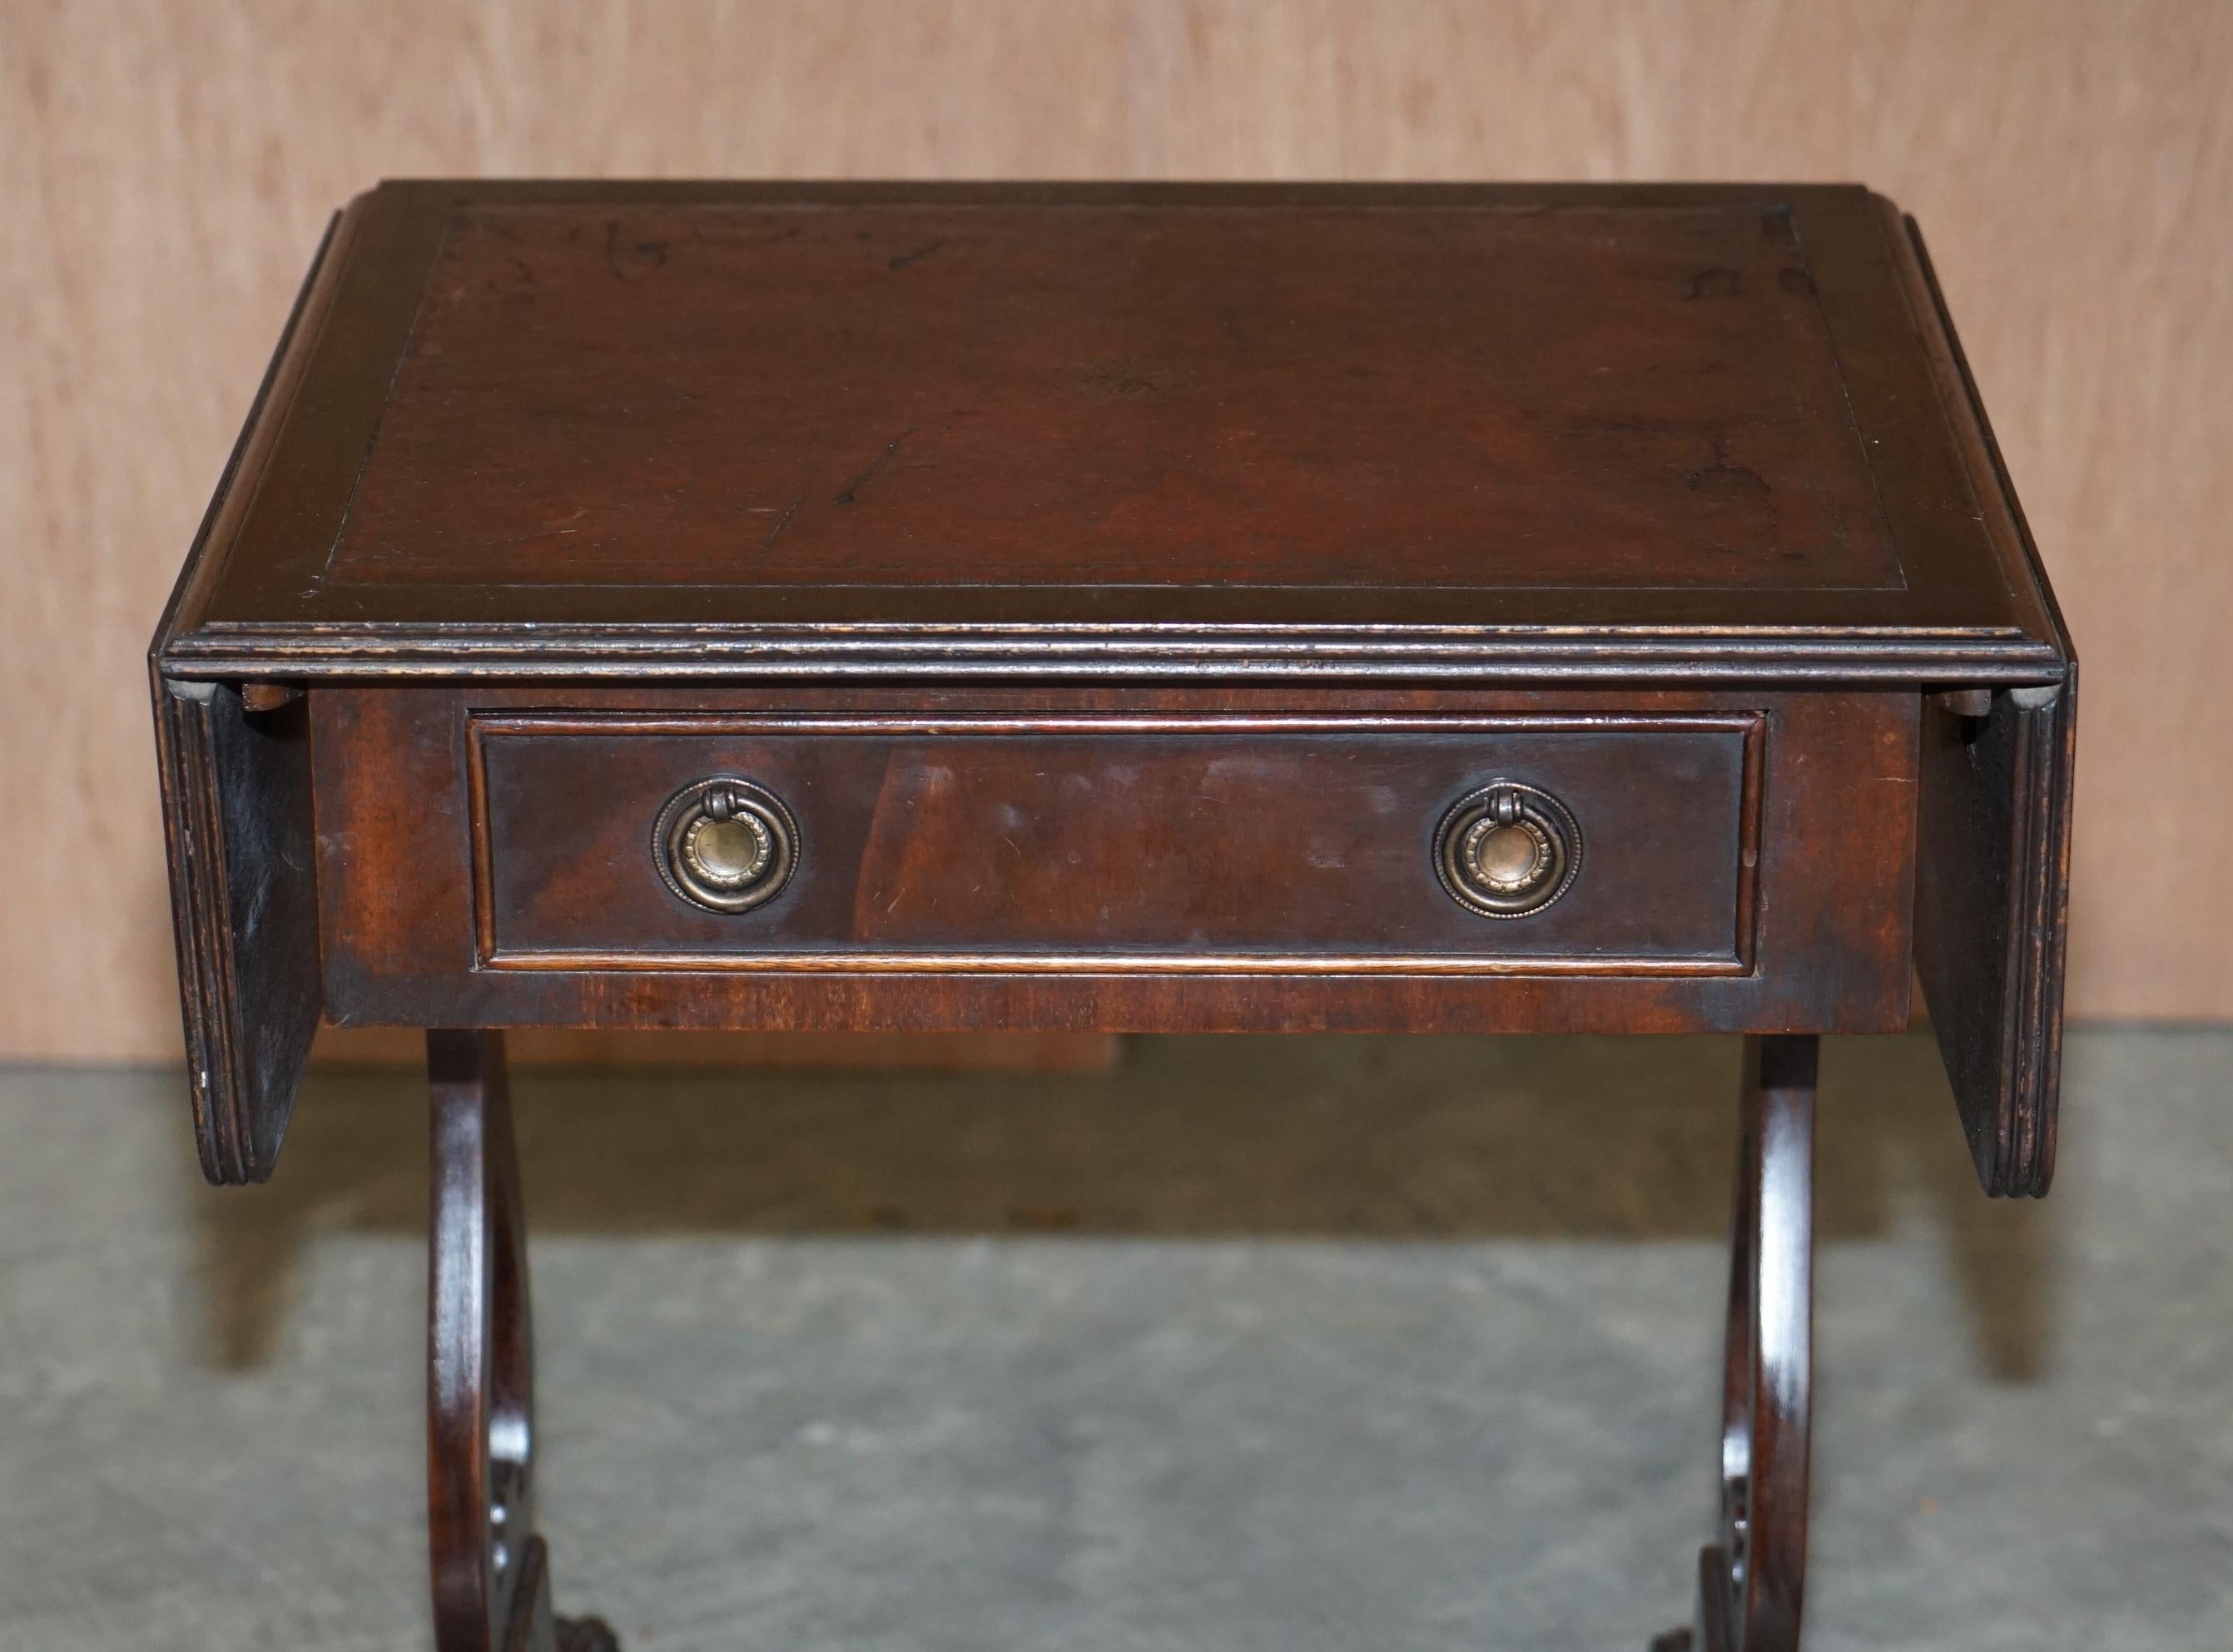 English Vintage Distressed Oxblood Leather Side Table Extending Top Great Games Table